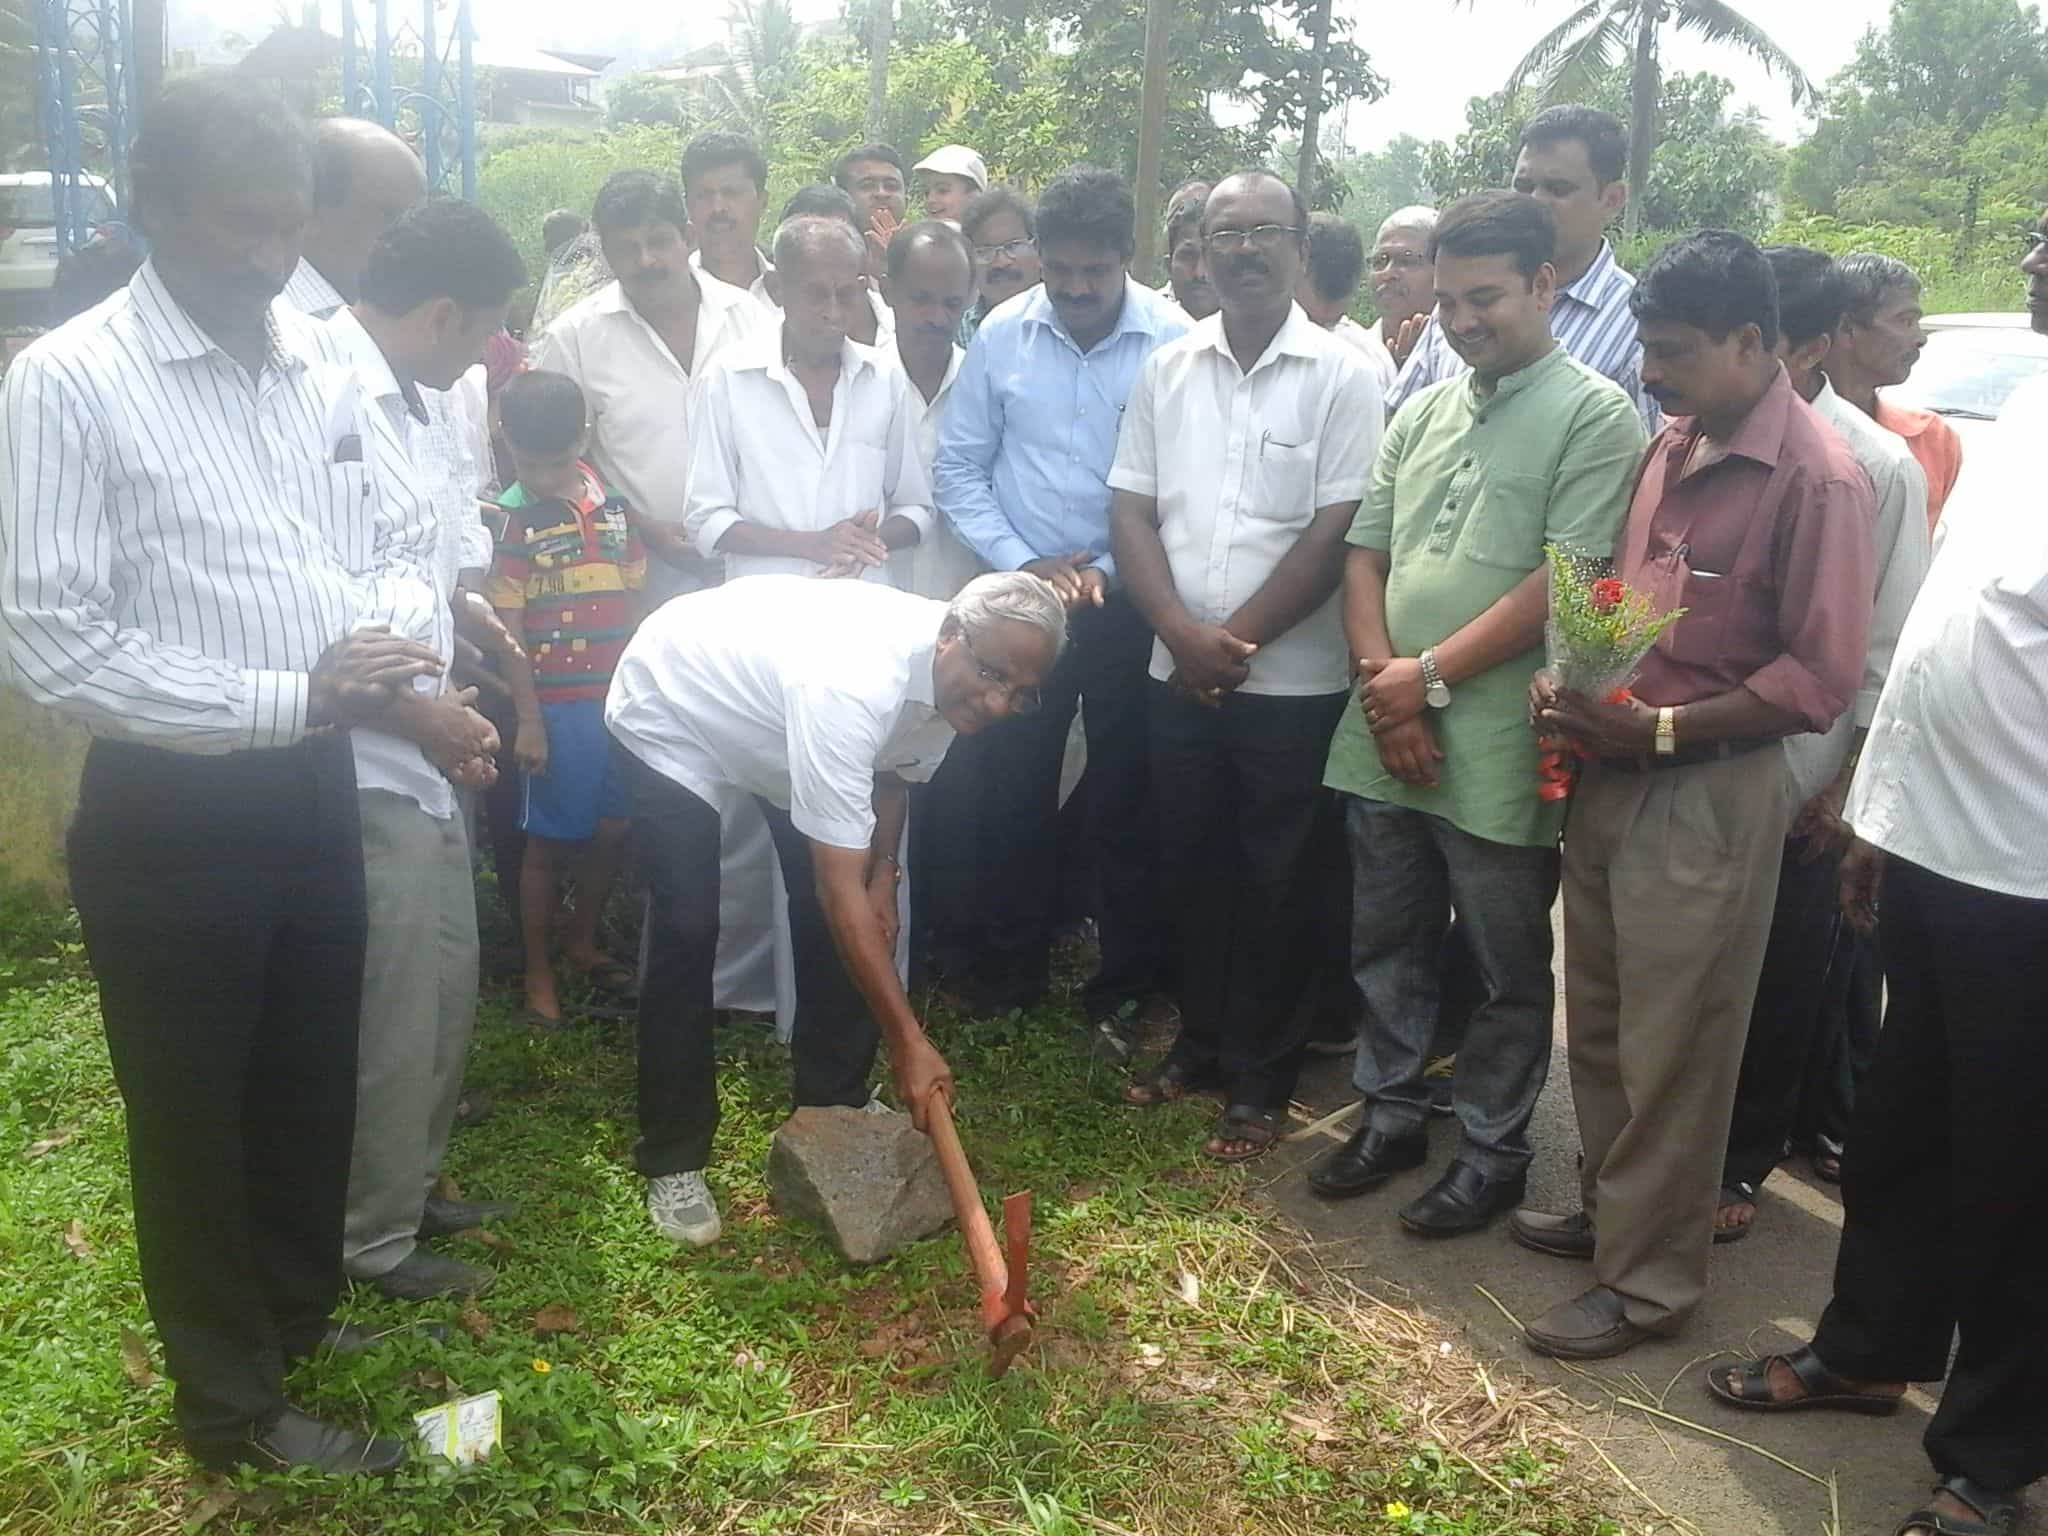 Foundation stone laid for flood control works worth Rs. 3.40 crores by J R Lobo in Mangalore South constituency